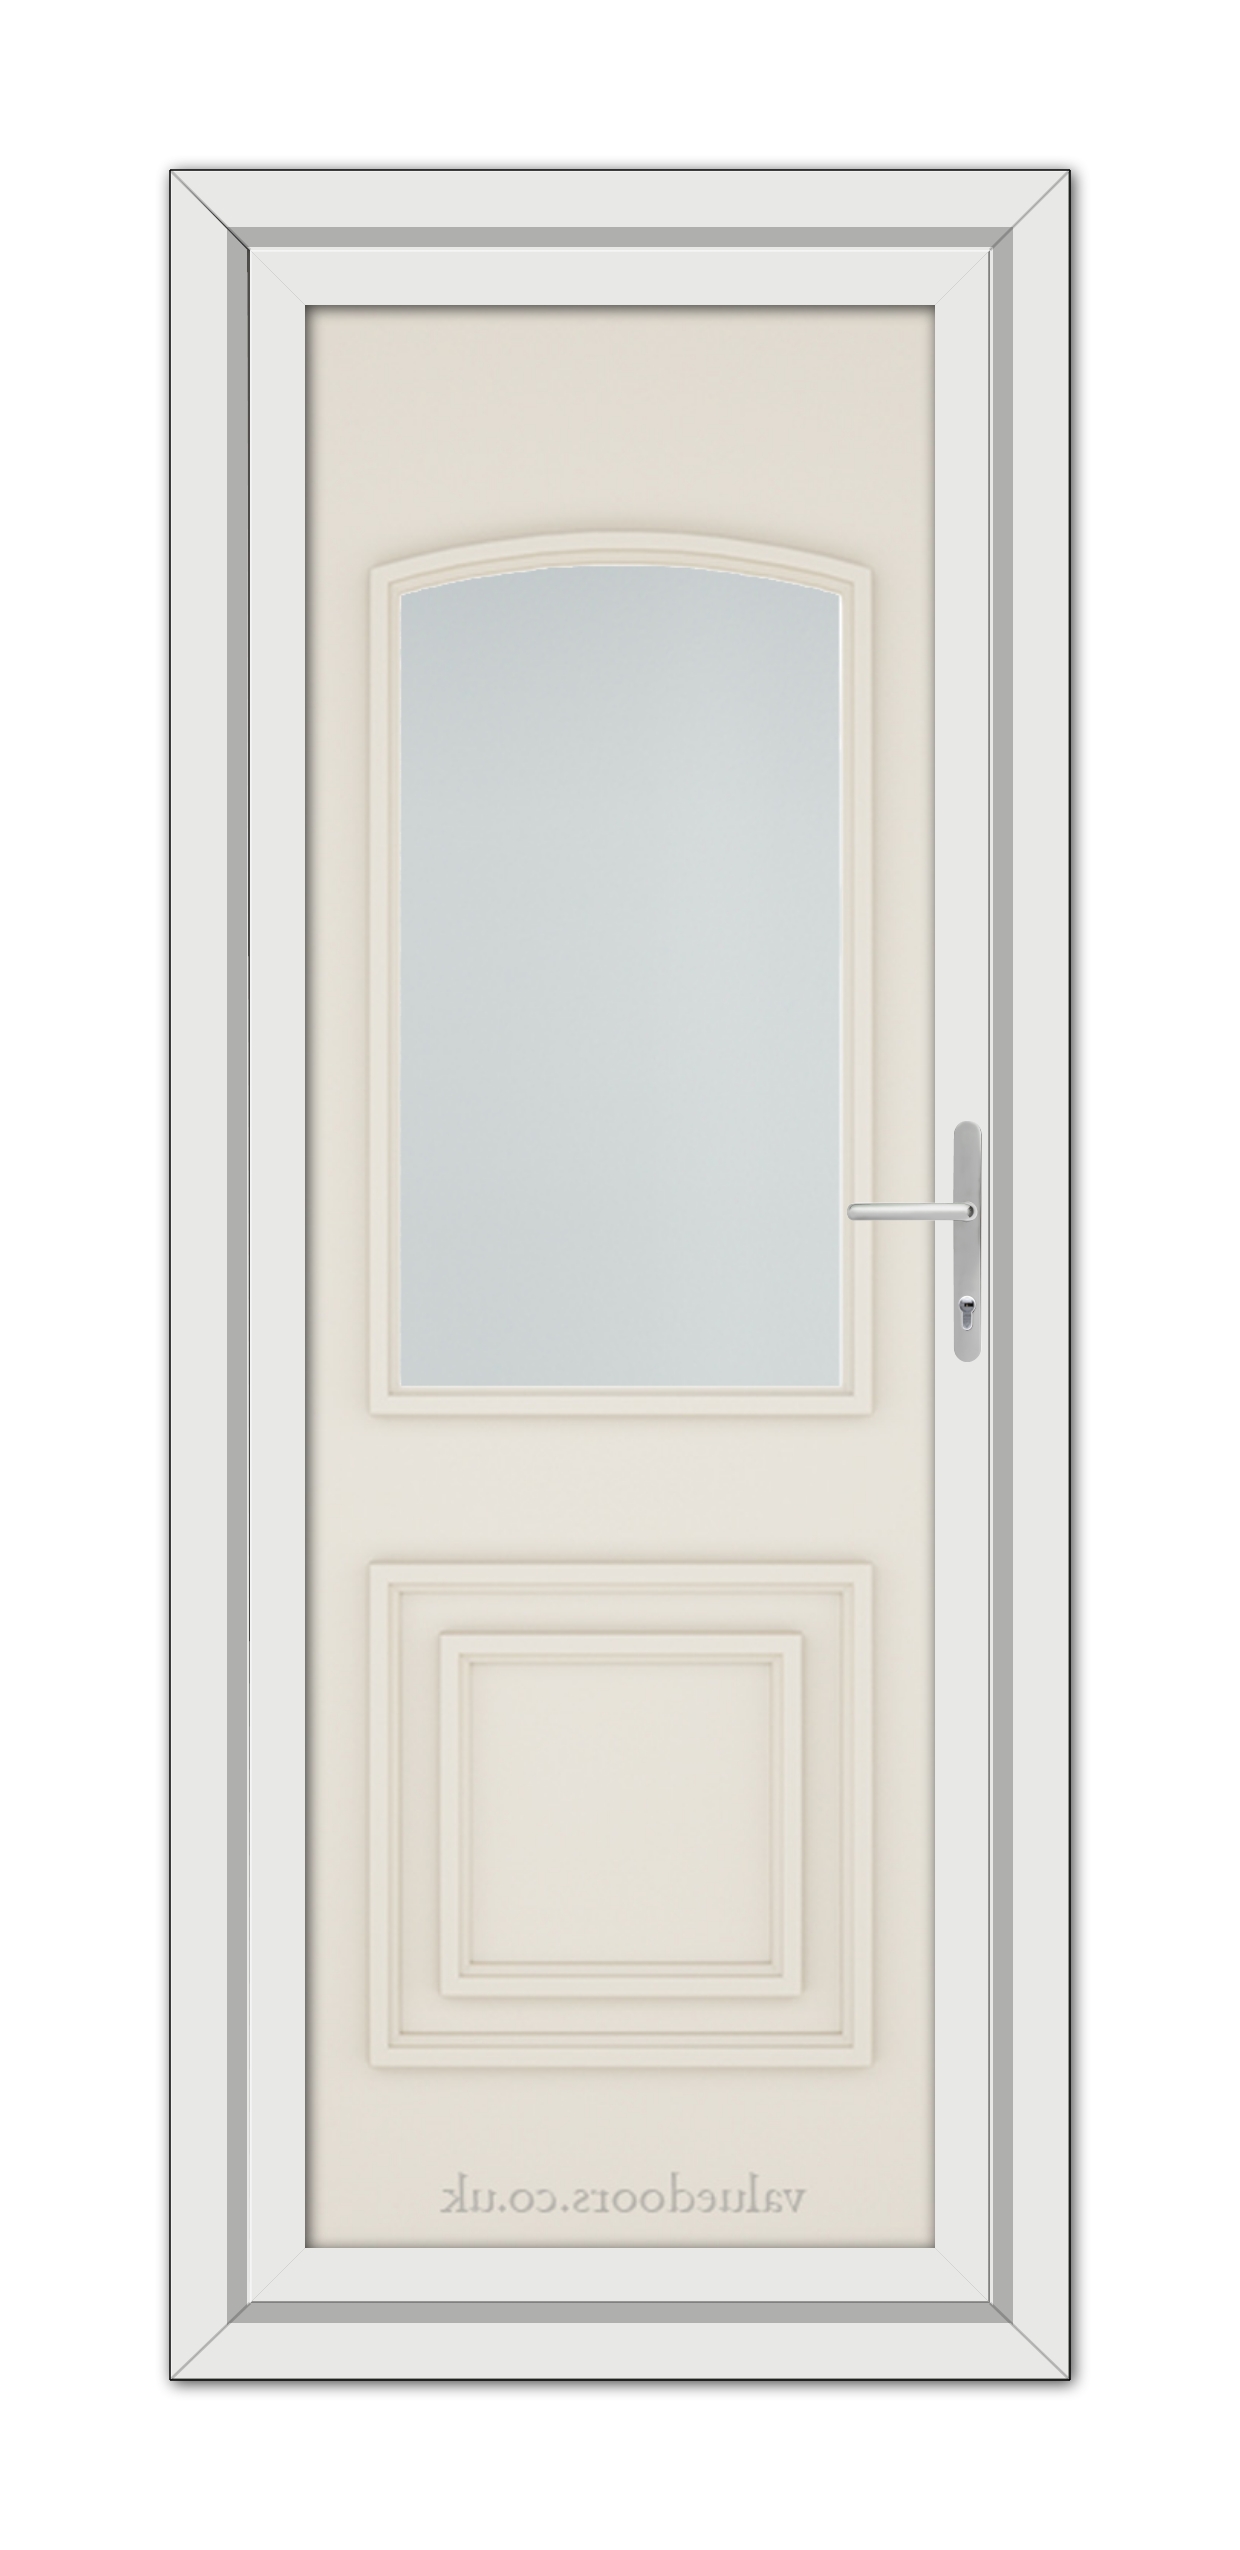 A vertical image of a closed Cream Balmoral Classic uPVC Door featuring a rectangular frosted glass pane and a silver handle, set within a white frame.